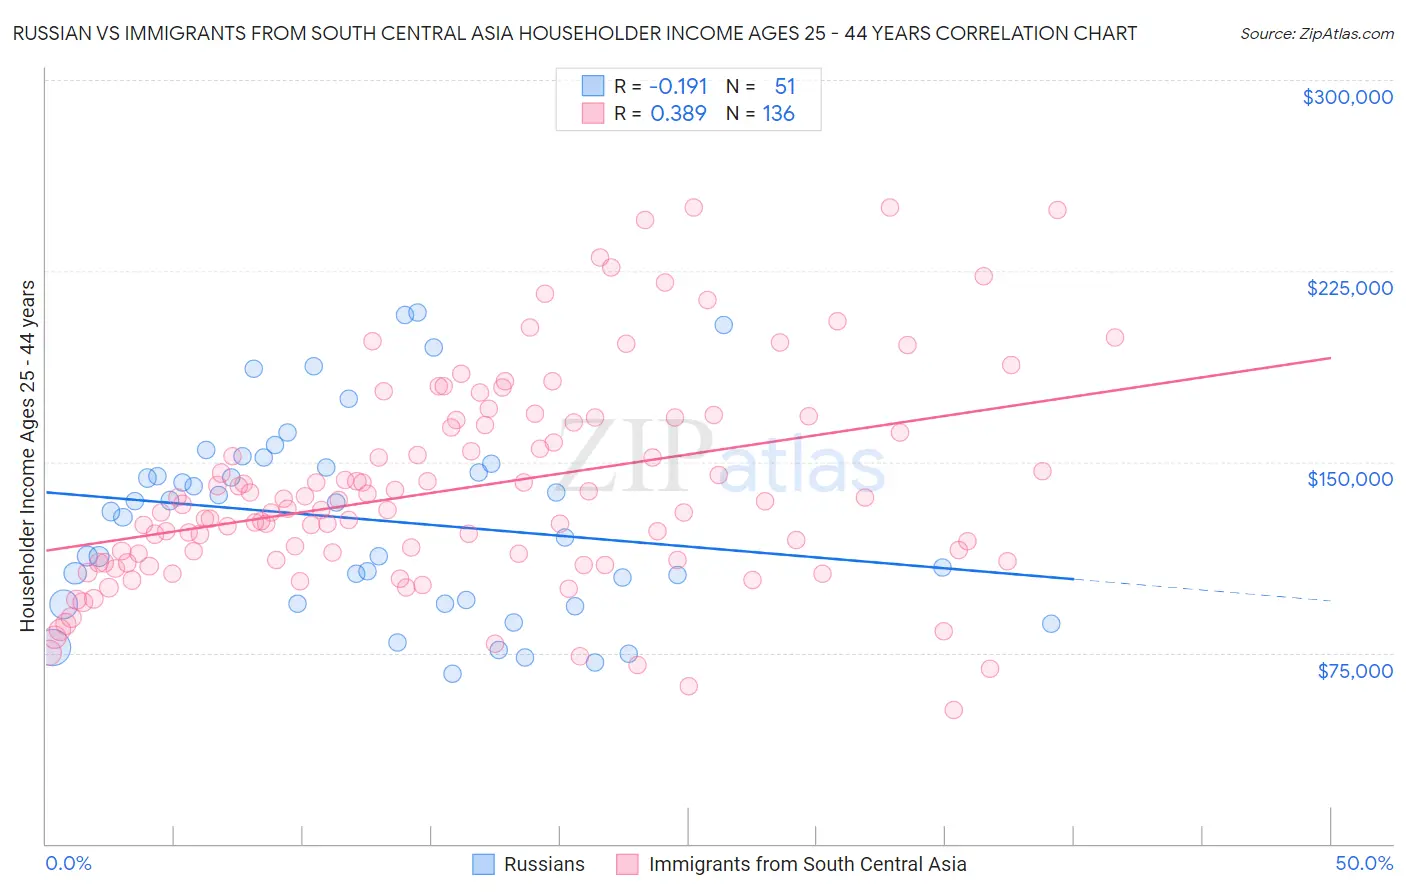 Russian vs Immigrants from South Central Asia Householder Income Ages 25 - 44 years